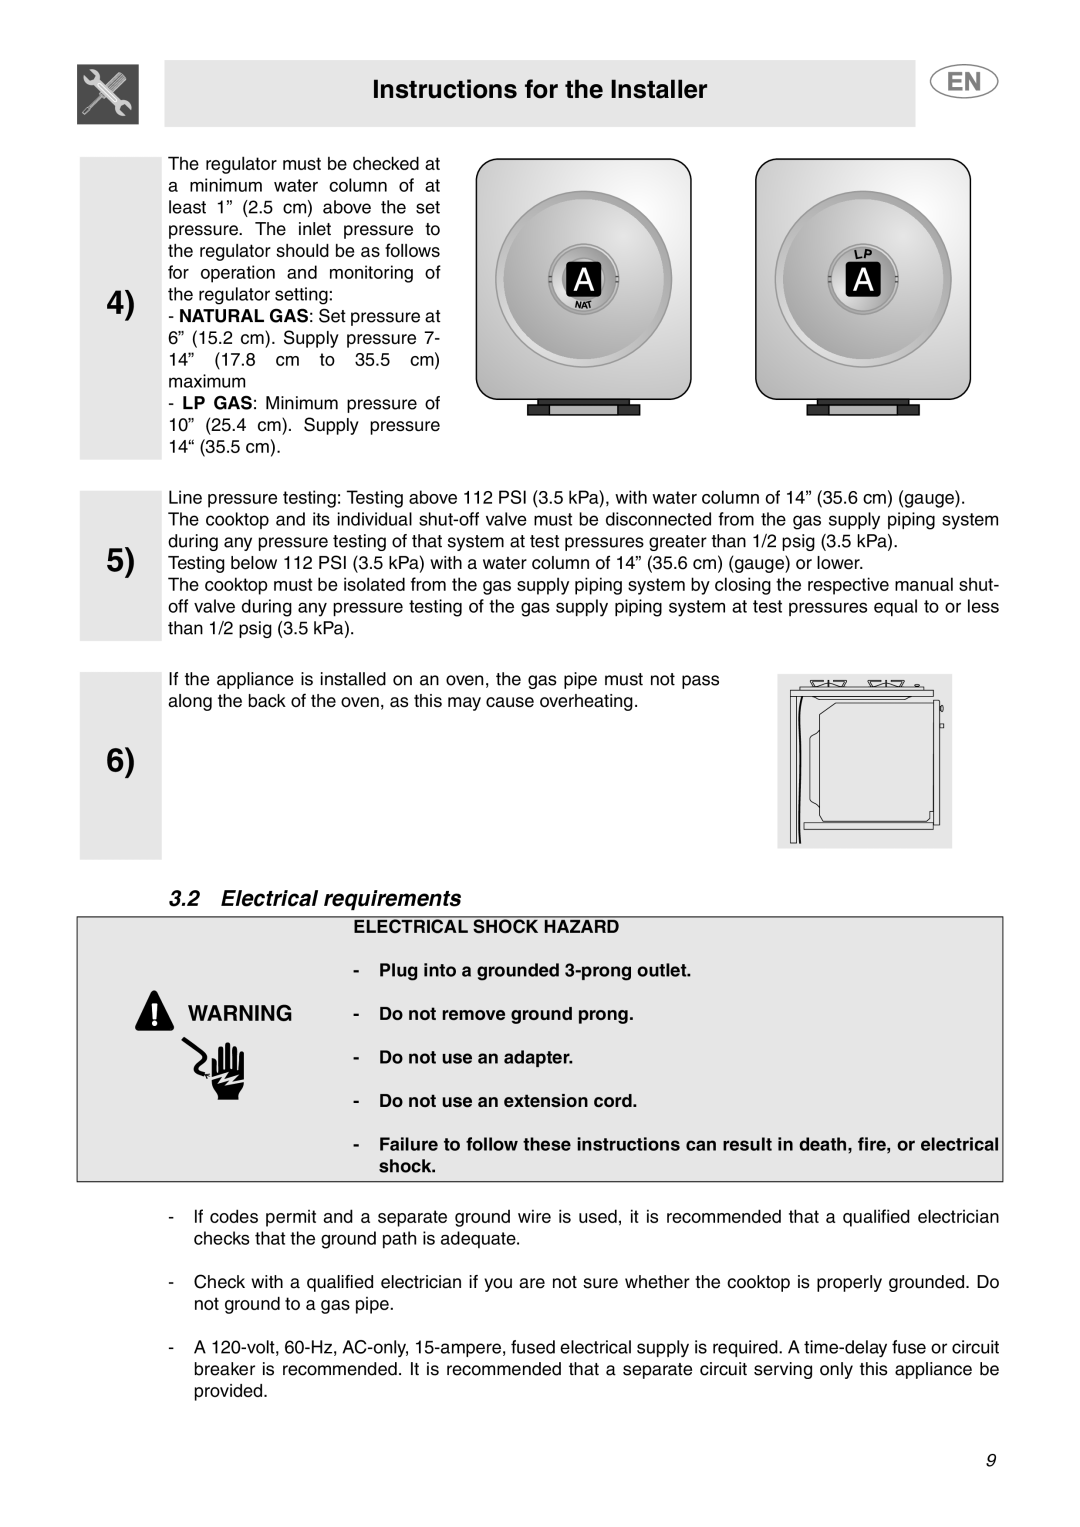 Smeg PU64 Electrical requirements, Electrical Shock Hazard, Plug into a grounded 3-prong outlet, Do not use an adapter 